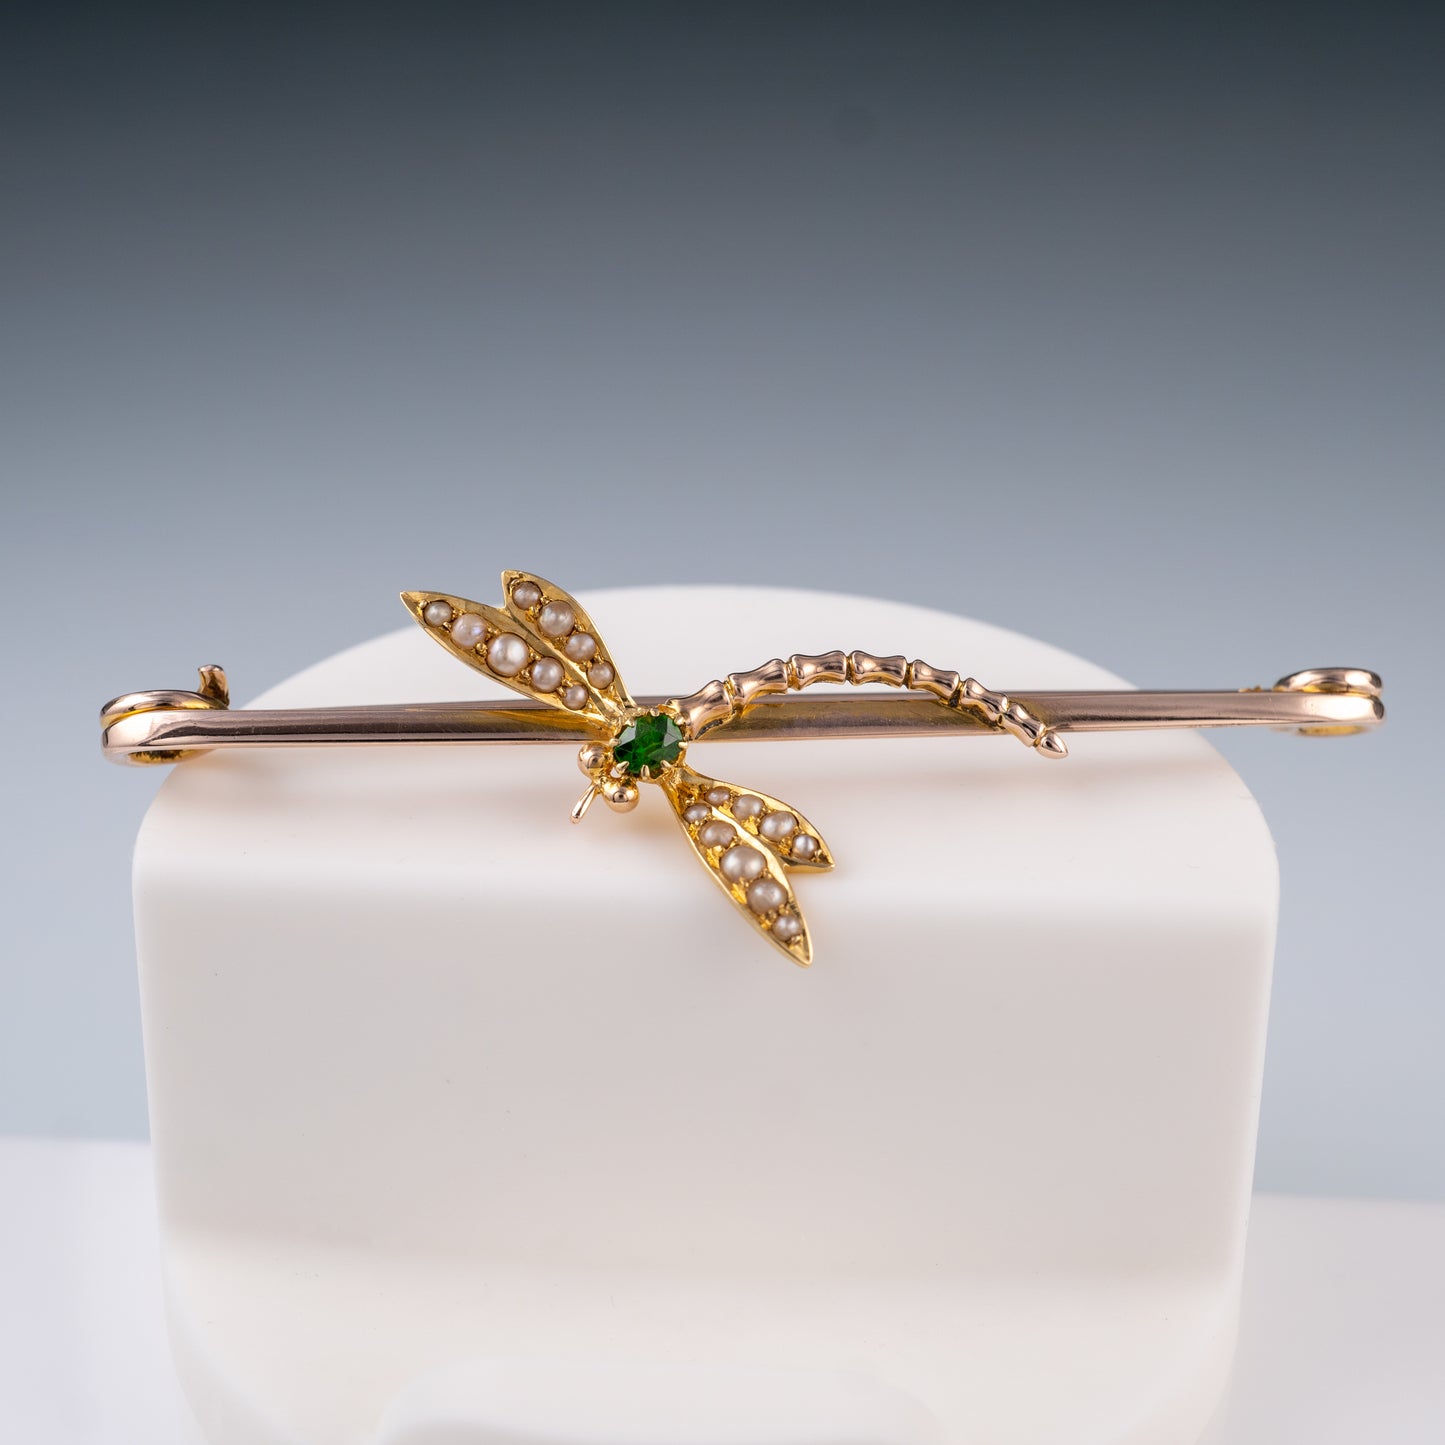 antique gold dragonfly brooch